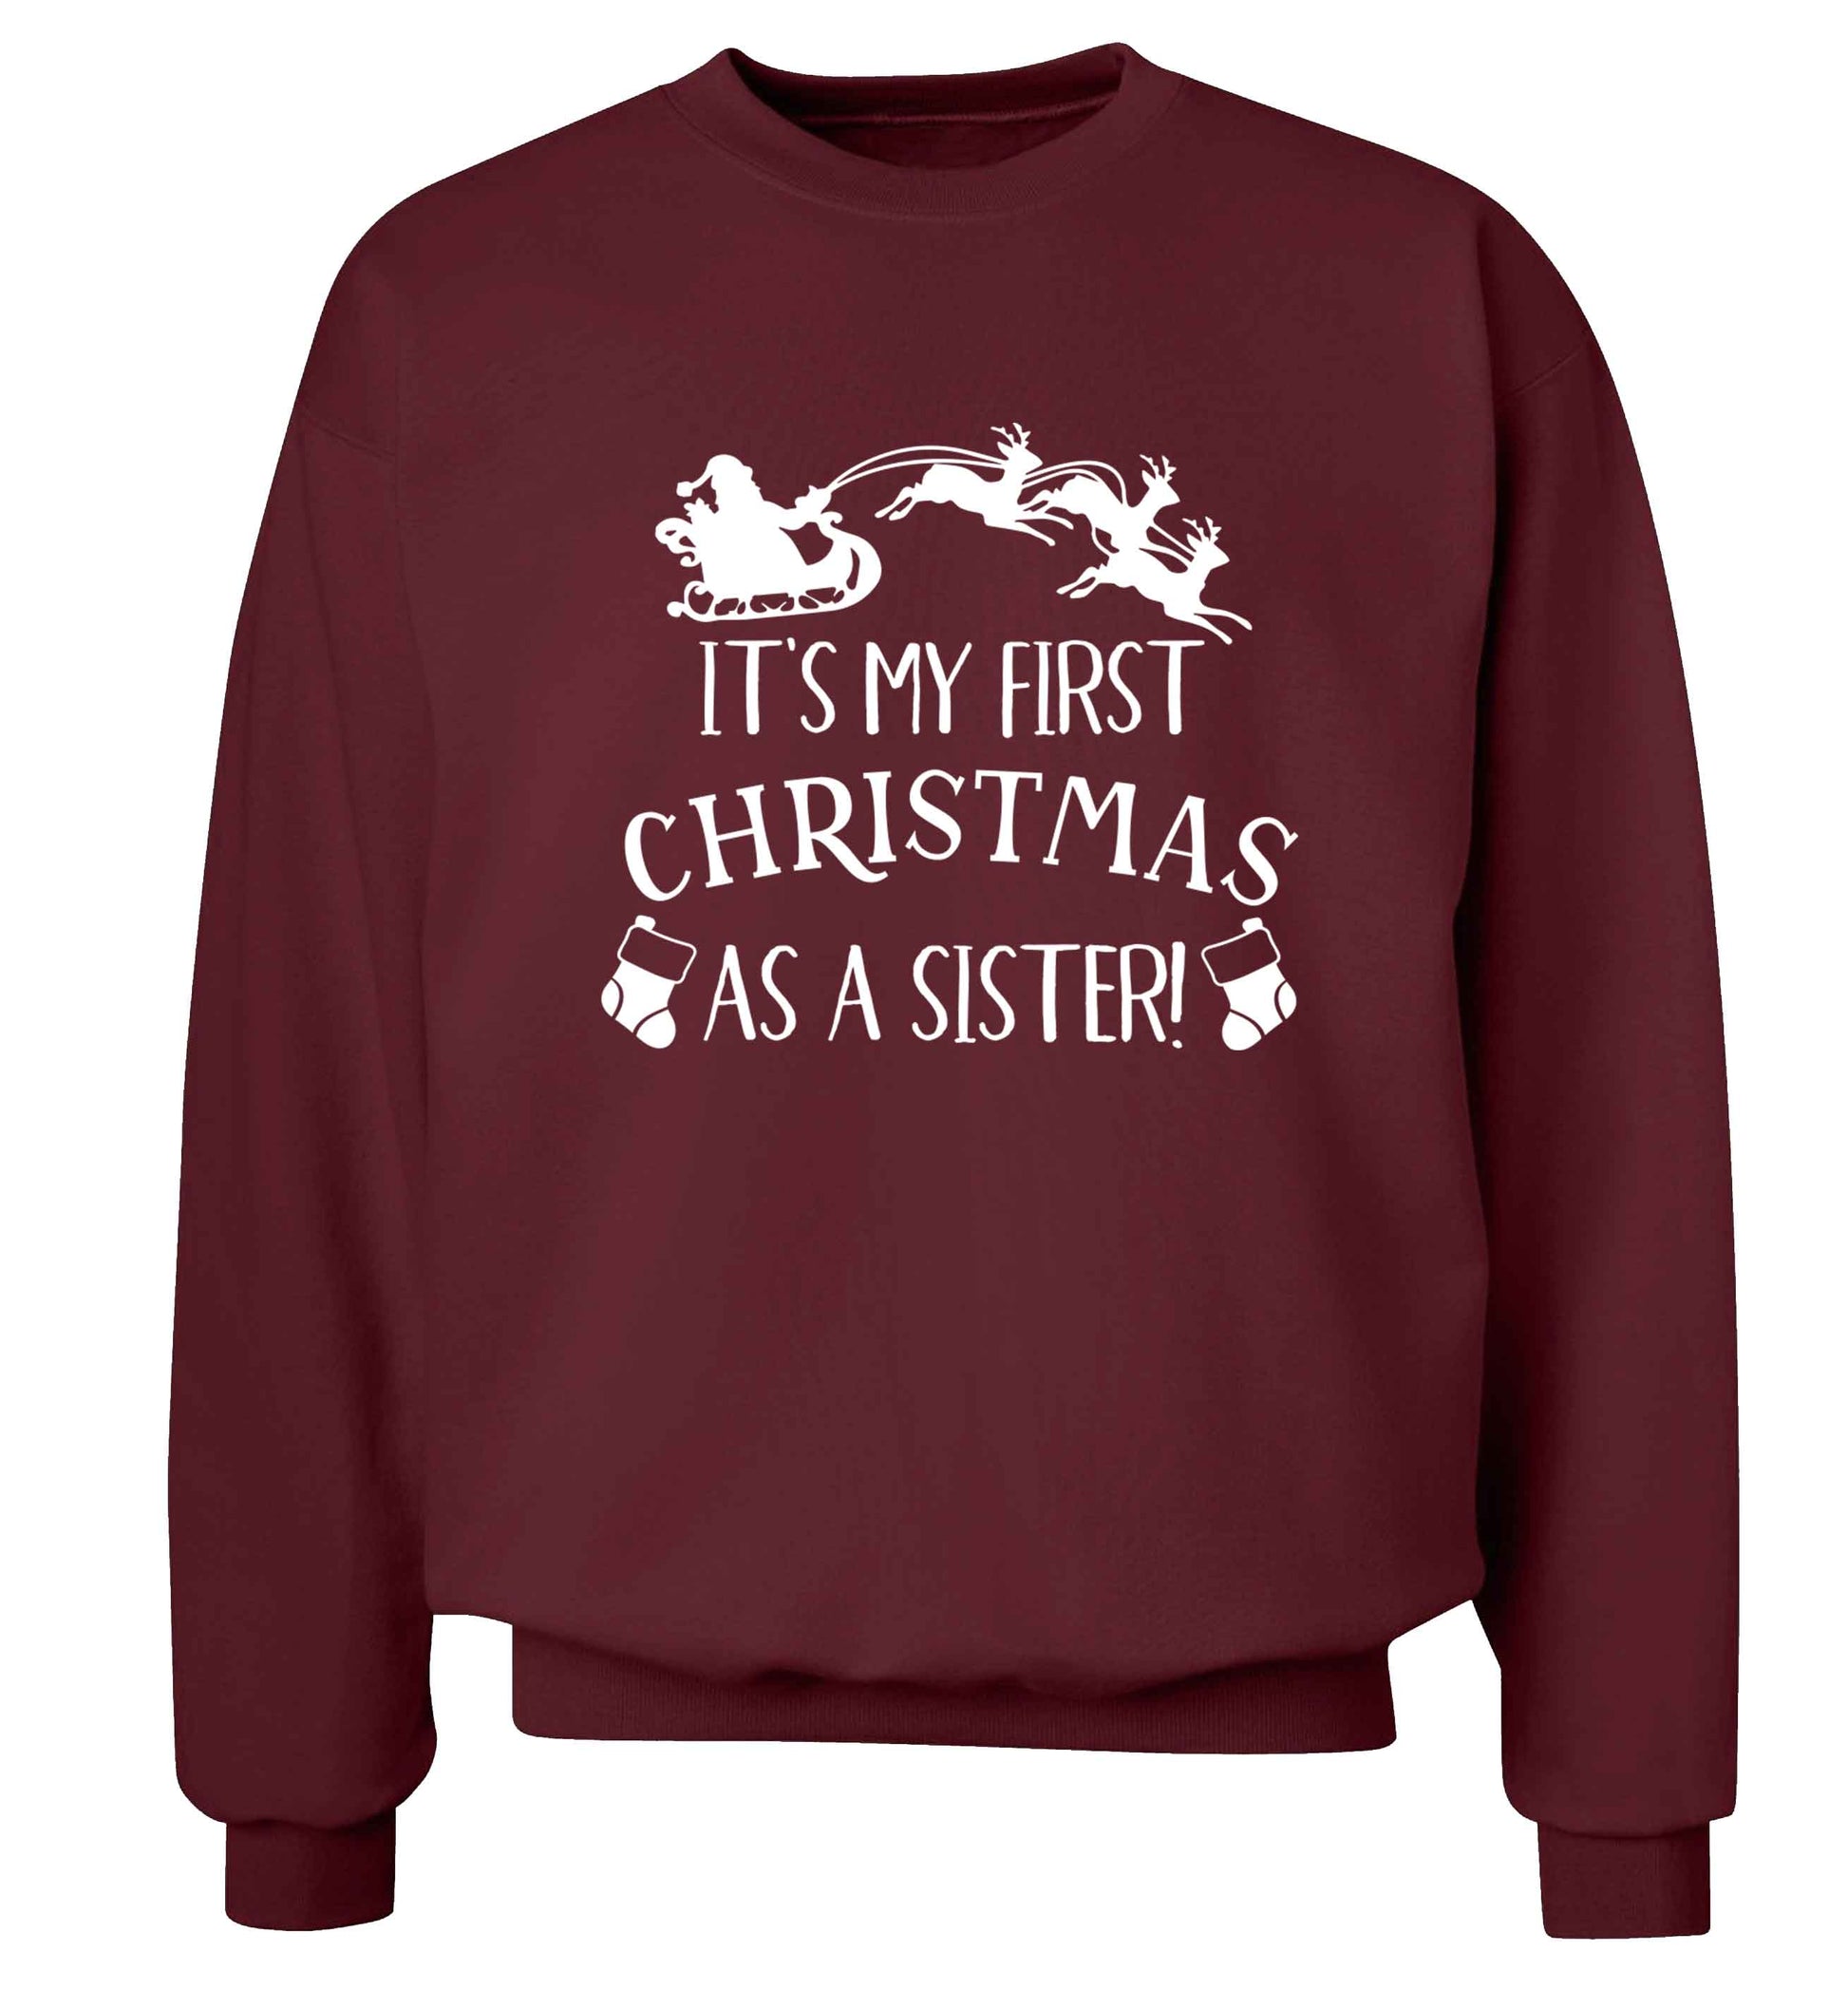 It's my first Christmas as a sister! Adult's unisex maroon Sweater 2XL